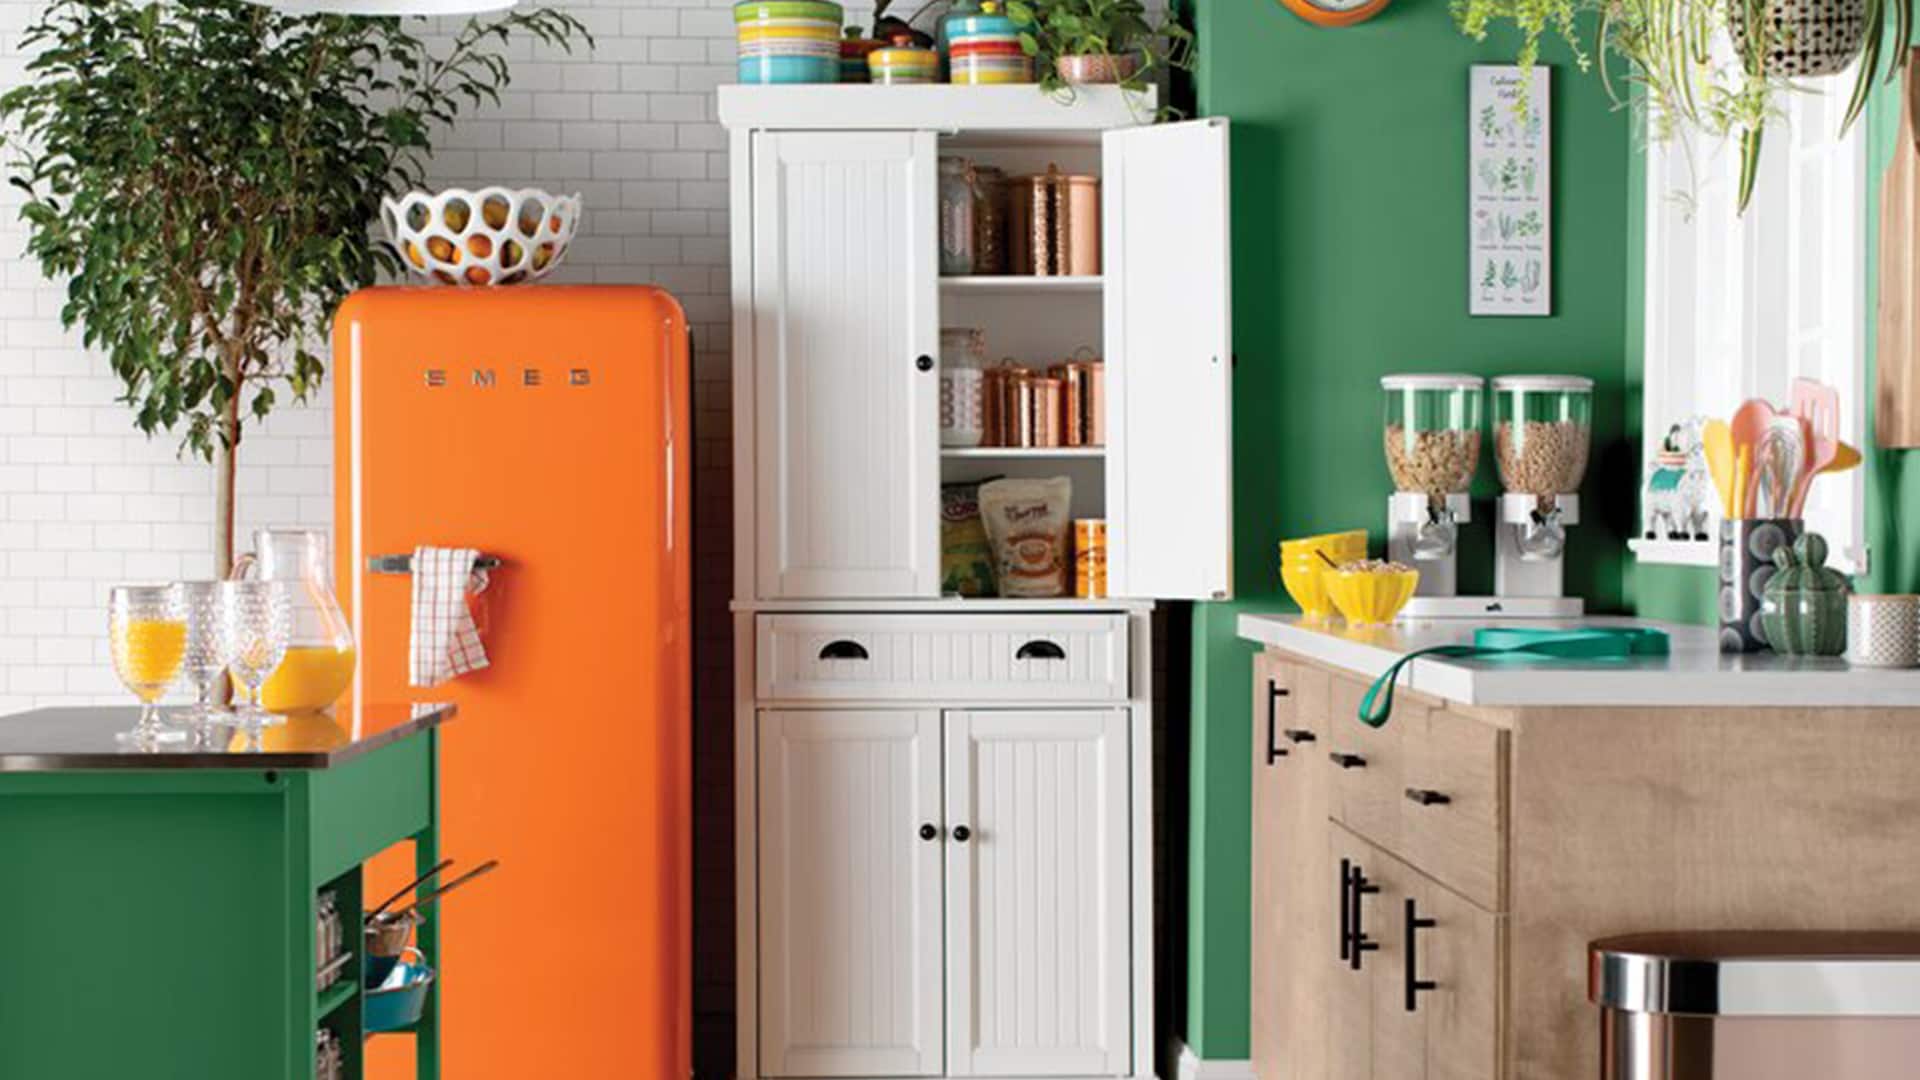 green and orange kitchen with double cereal dispenser